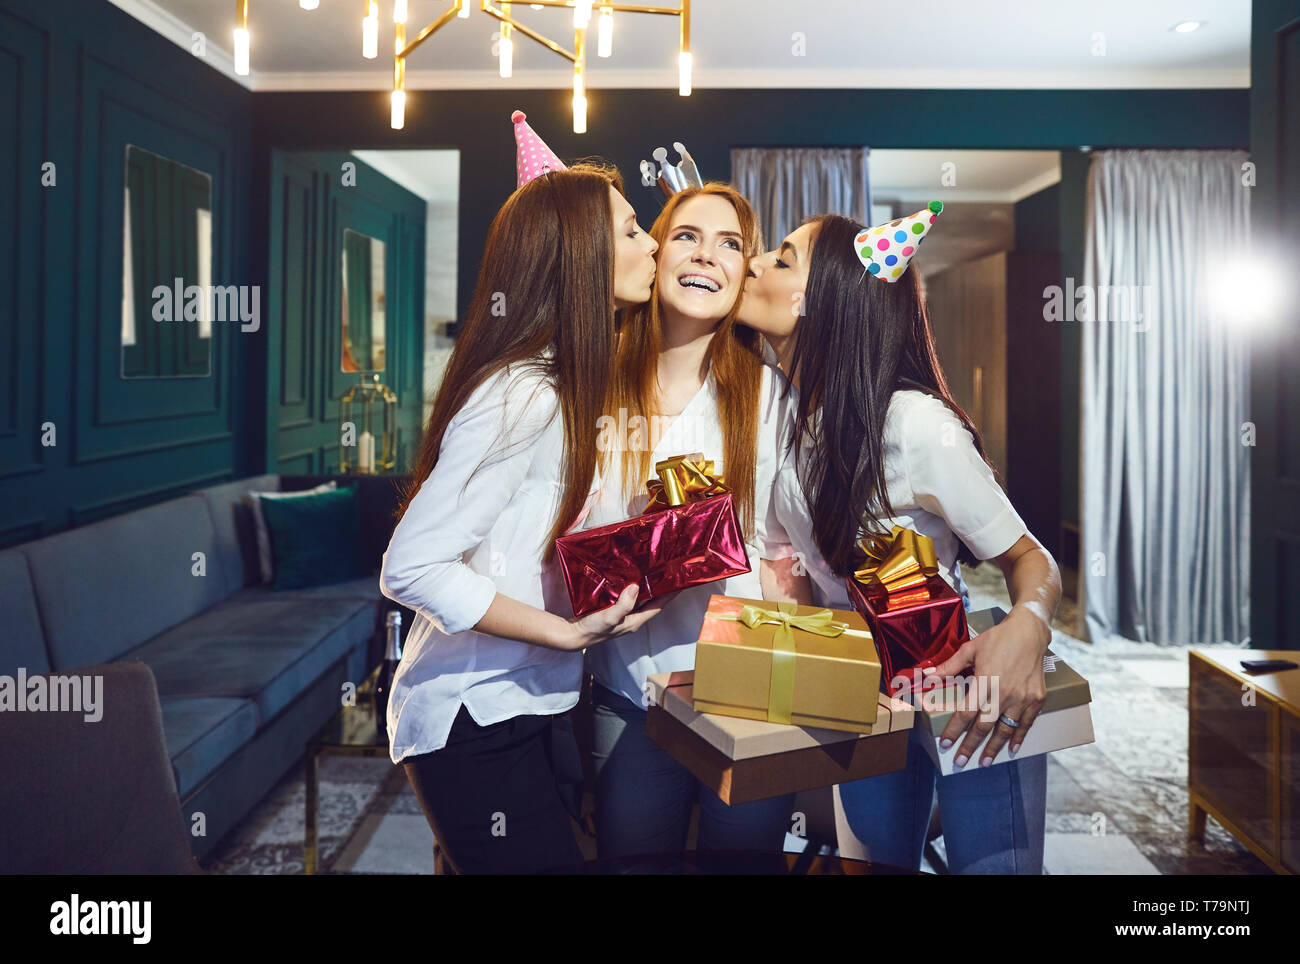 Girls friend congratulate gifts for a birthday party Stock Photo